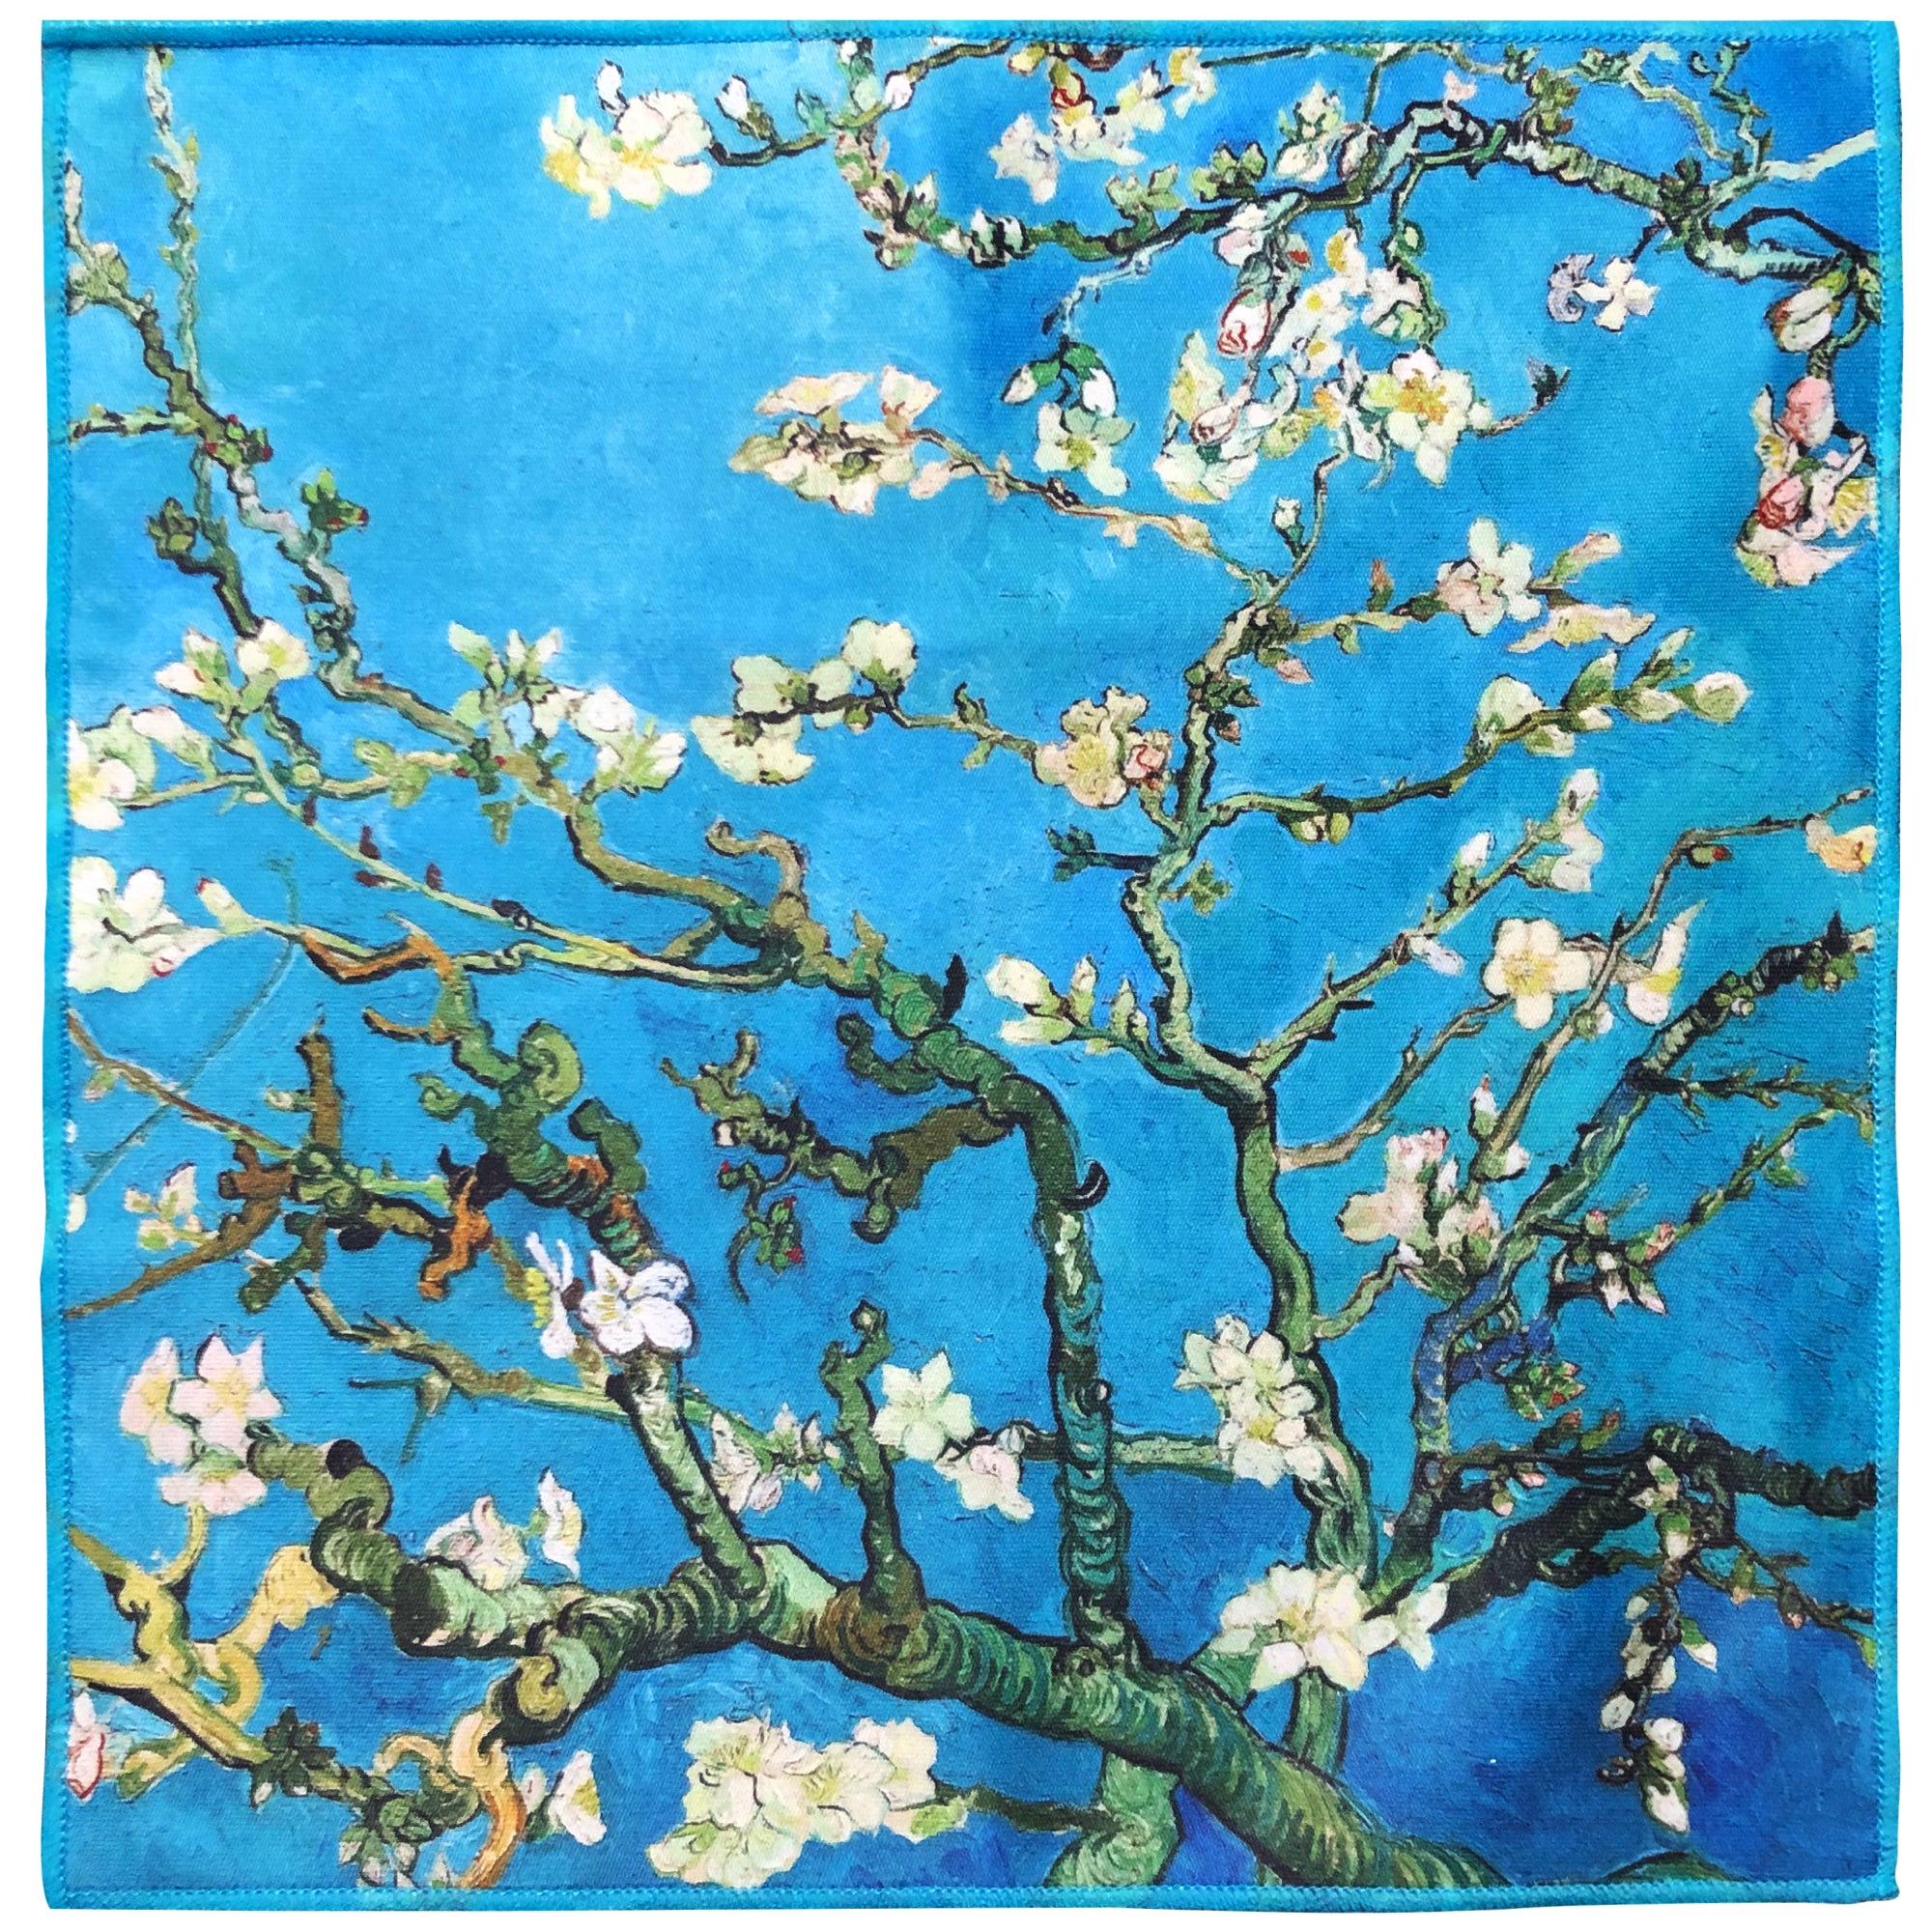 [6 Pack] Vincent Van Gogh "Almond Blossom" - Art Collection - Ultra Premium Quality Microfiber Cleaning Cloths